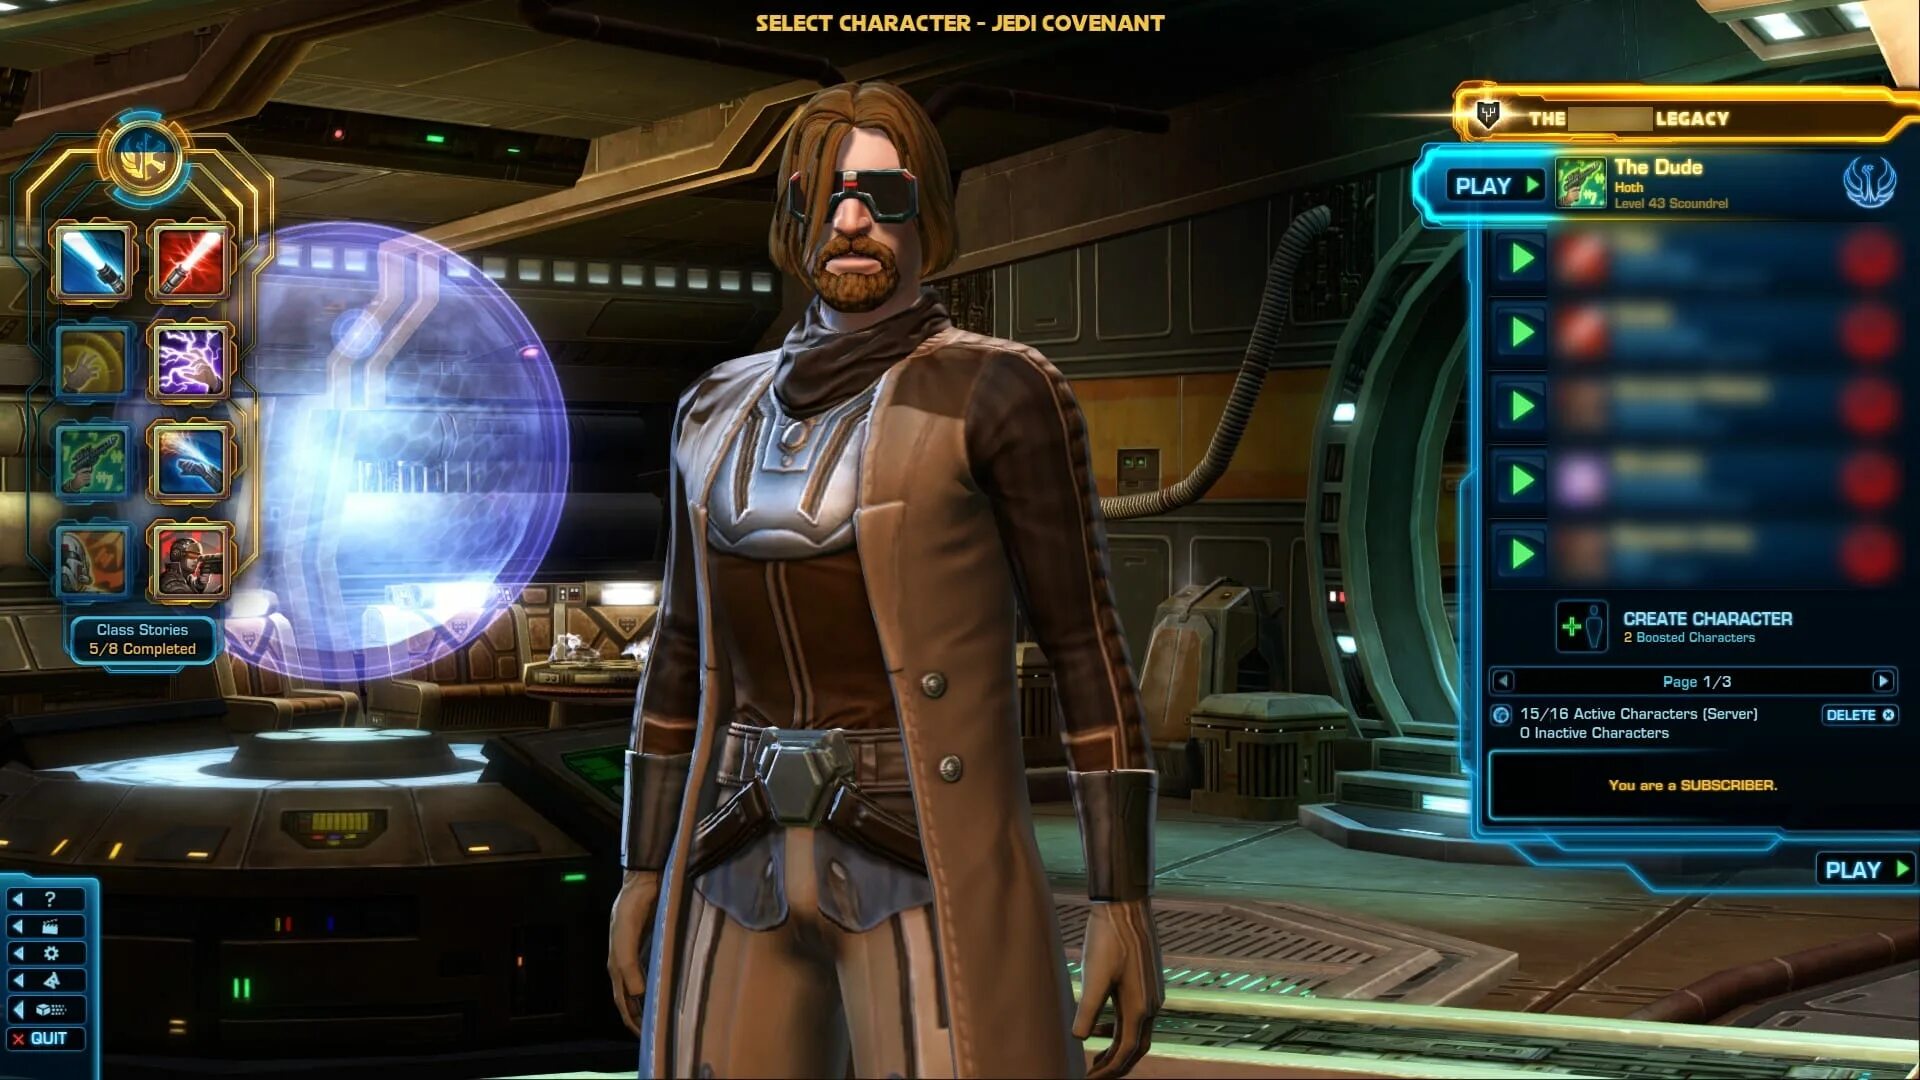 Game update us. SWTOR Гамора. SWTOR сюжет. SWTOR characters. SWTOR профессии.